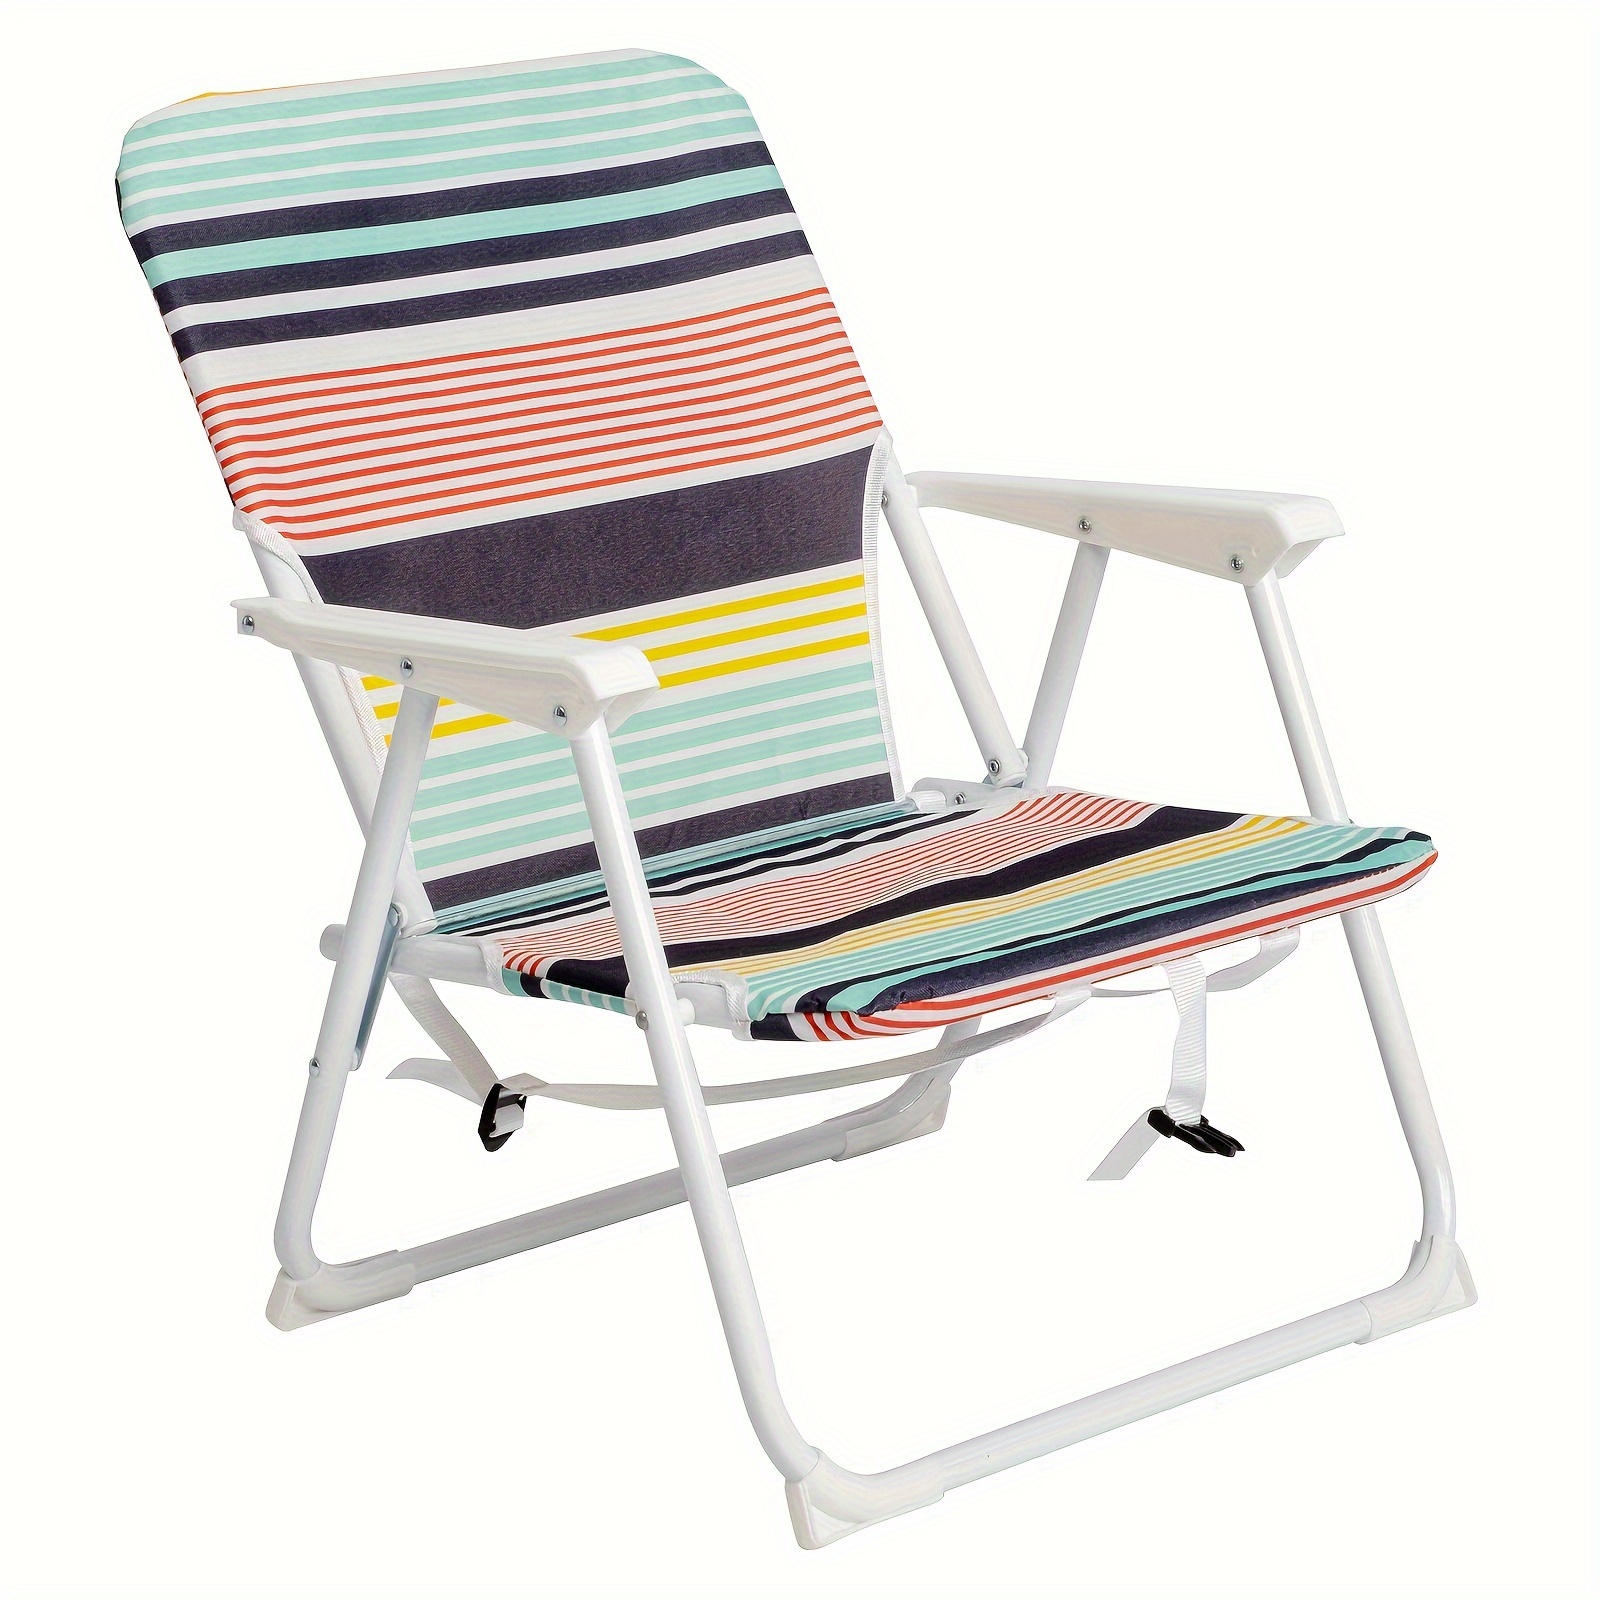 1pc, Colorful Beach Chair, Portable Folding Chairs For Outdoor Picnics,  Beach Trips, Camping, And Fishing - Lightweight And Durable Foldable Seat  For